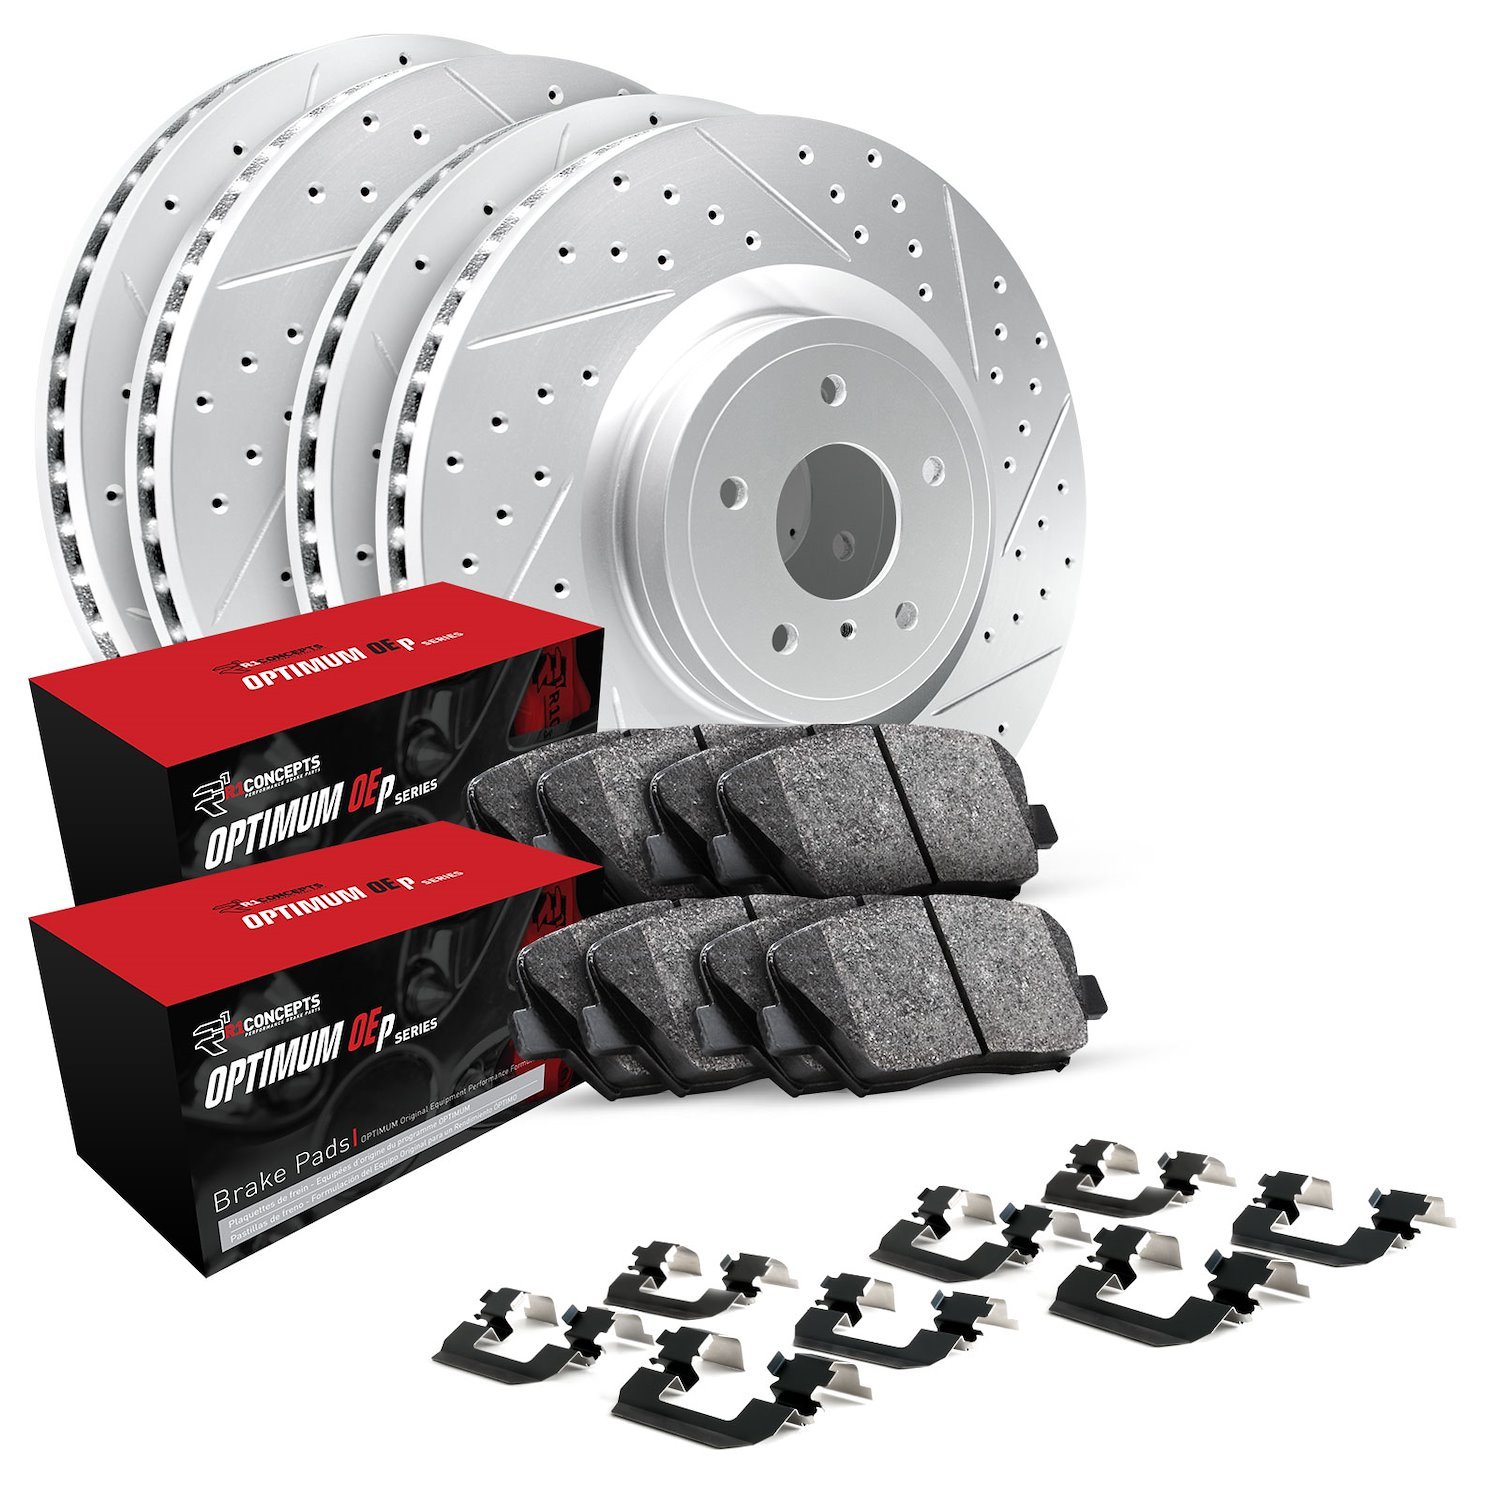 GEO-Carbon Drilled & Slotted Brake Rotor & Drum Set w/Optimum OE Pads, Shoes, & Hardware, 1998-2002 Fits Multiple Makes/Models